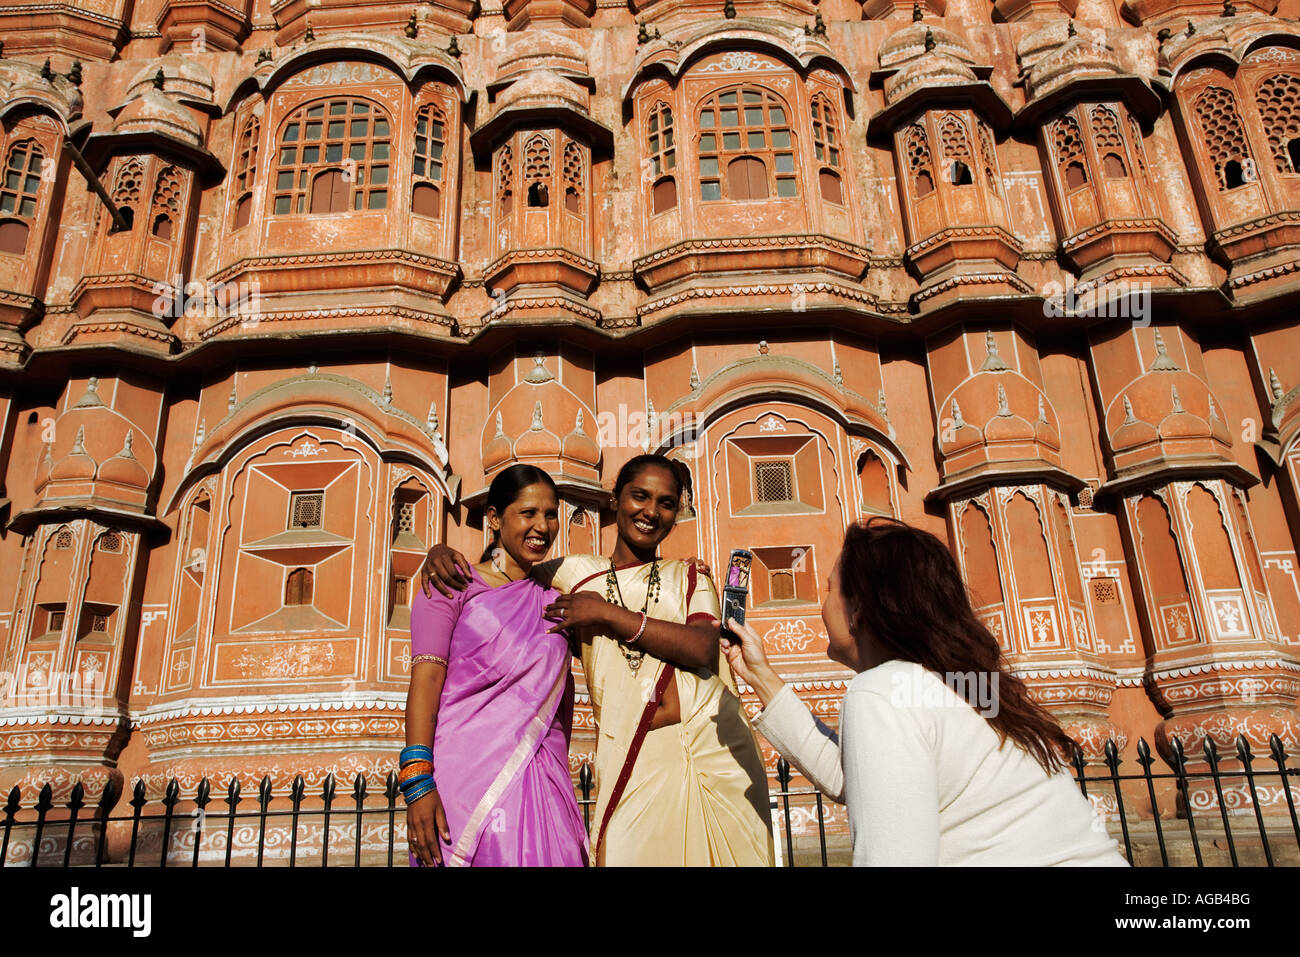 Tourist taking a picture of young Indian women in front of the Hawa Mahal or Palace of Winds Stock Photo